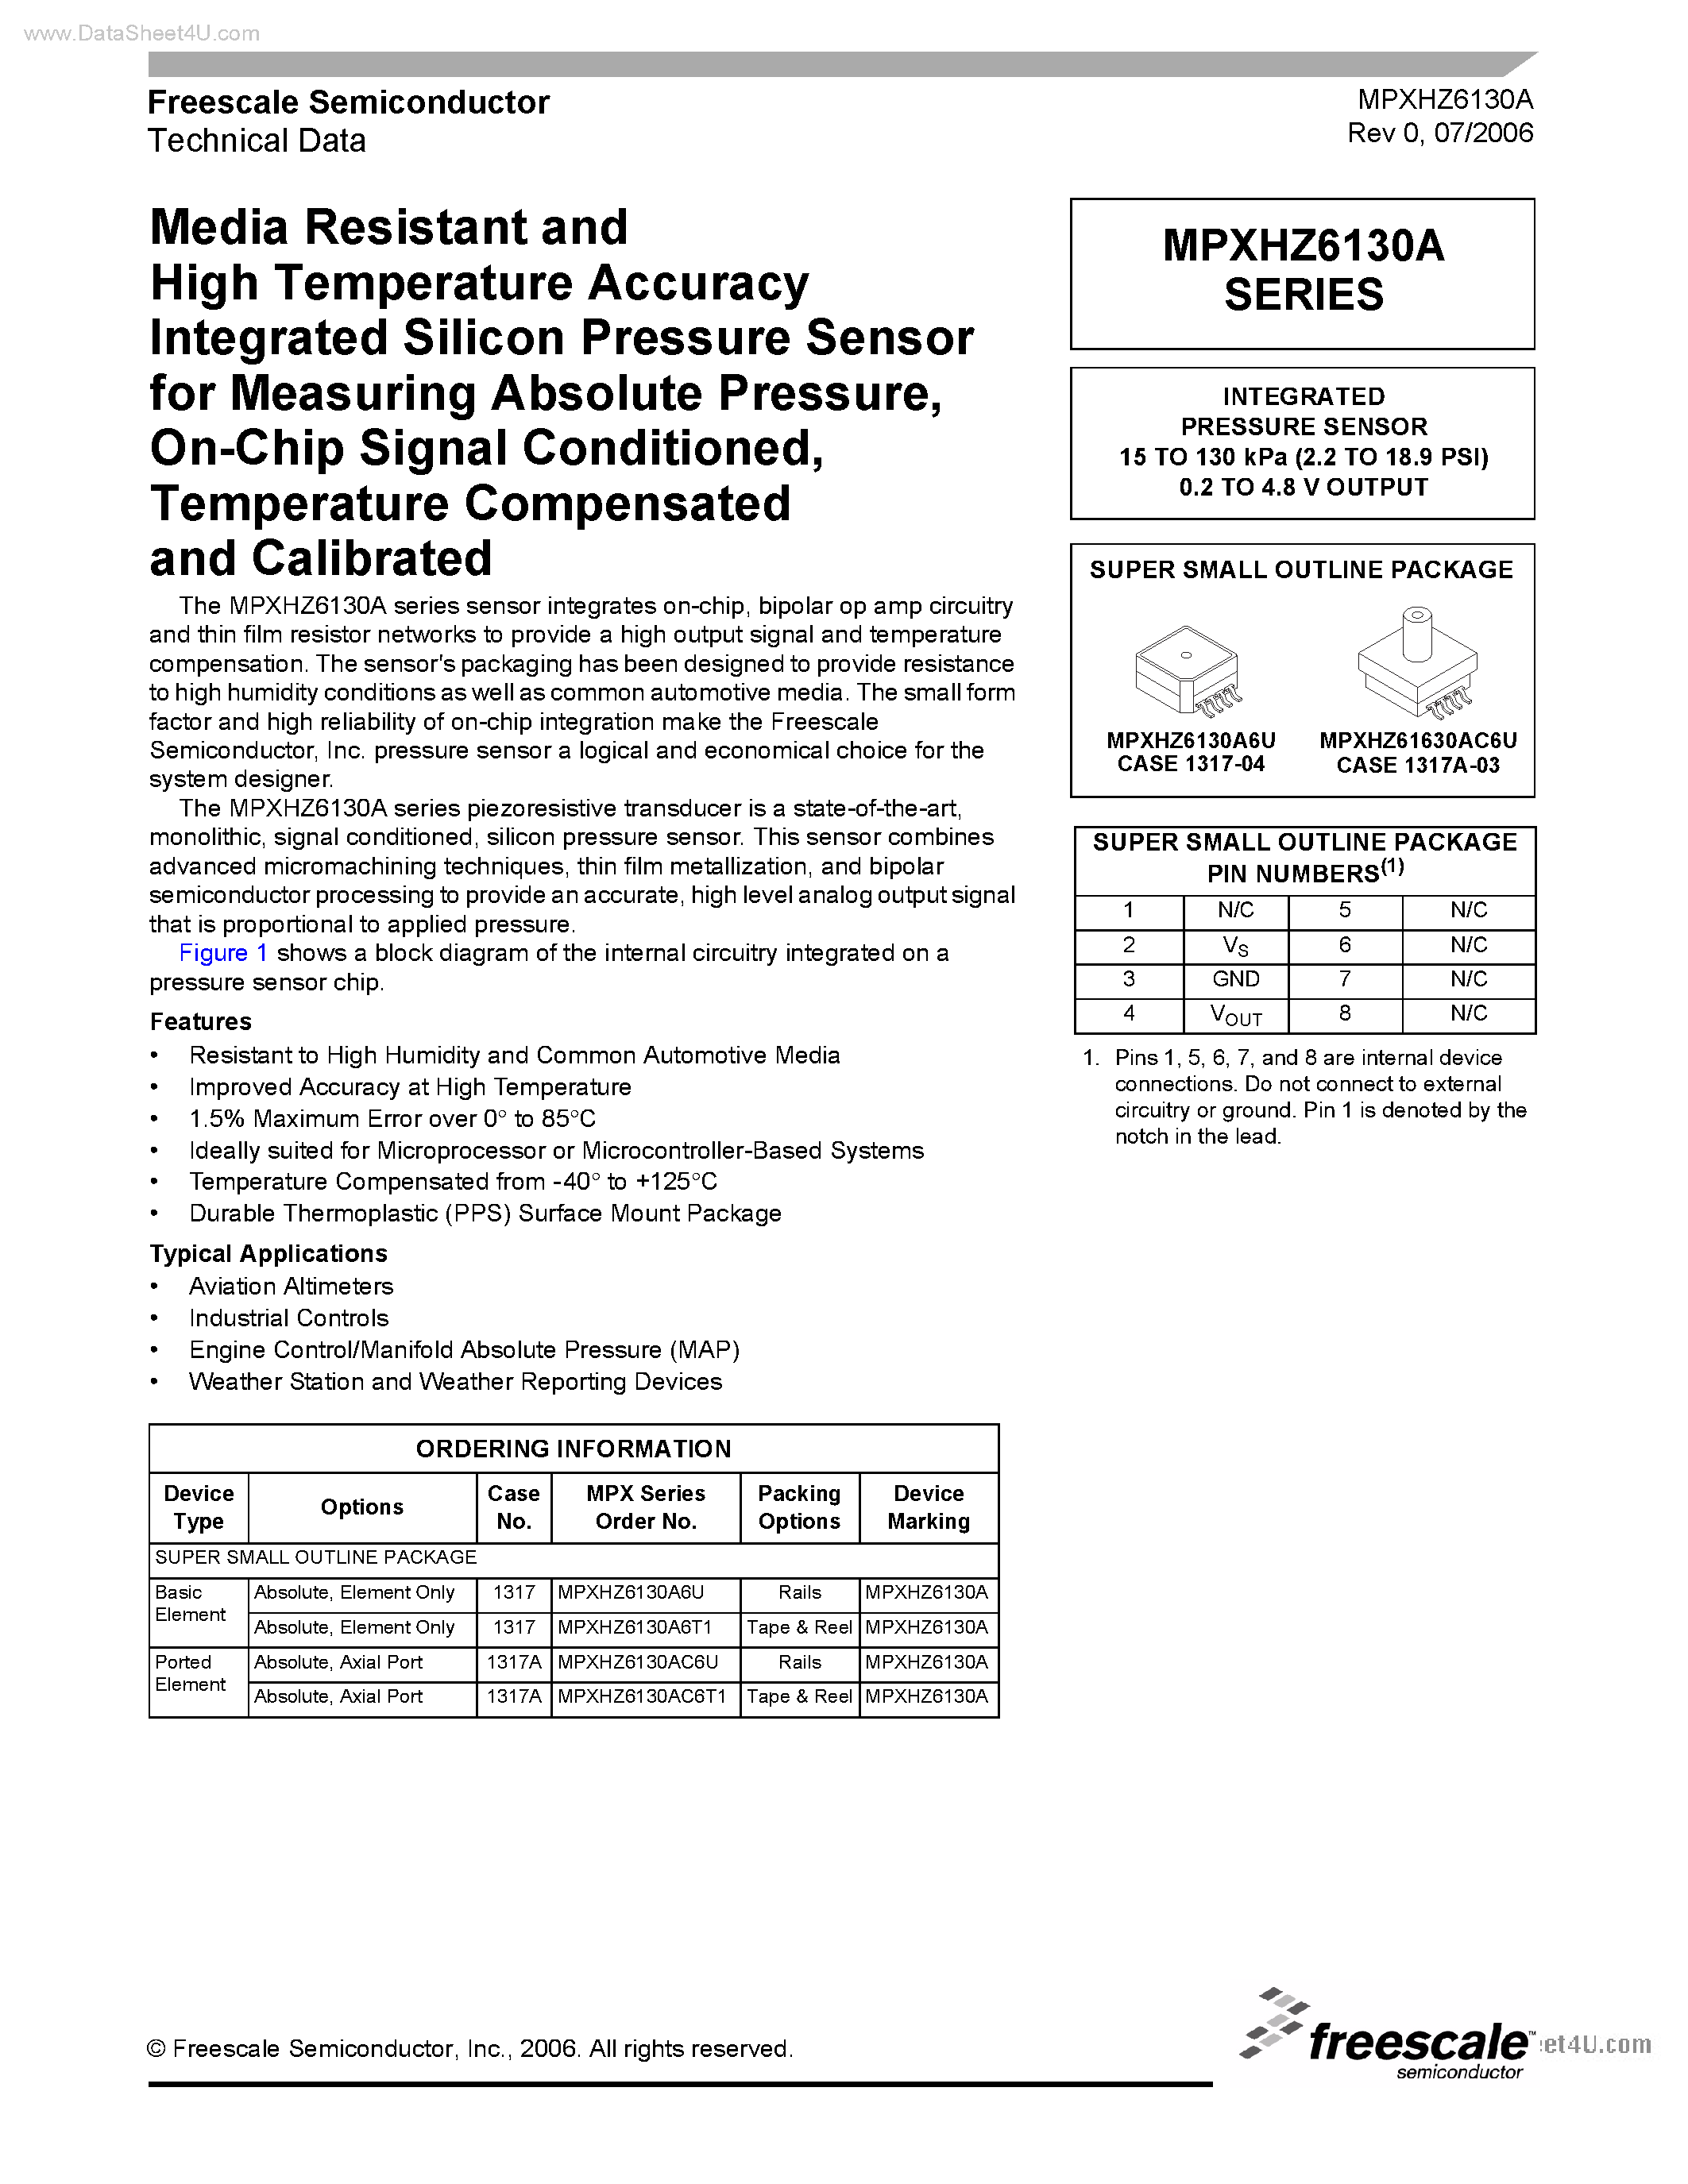 Datasheet MPXHZ6130A - Media Resistant and High Temperature Accuracy Intergrated Silicon Pressure Sensor page 1